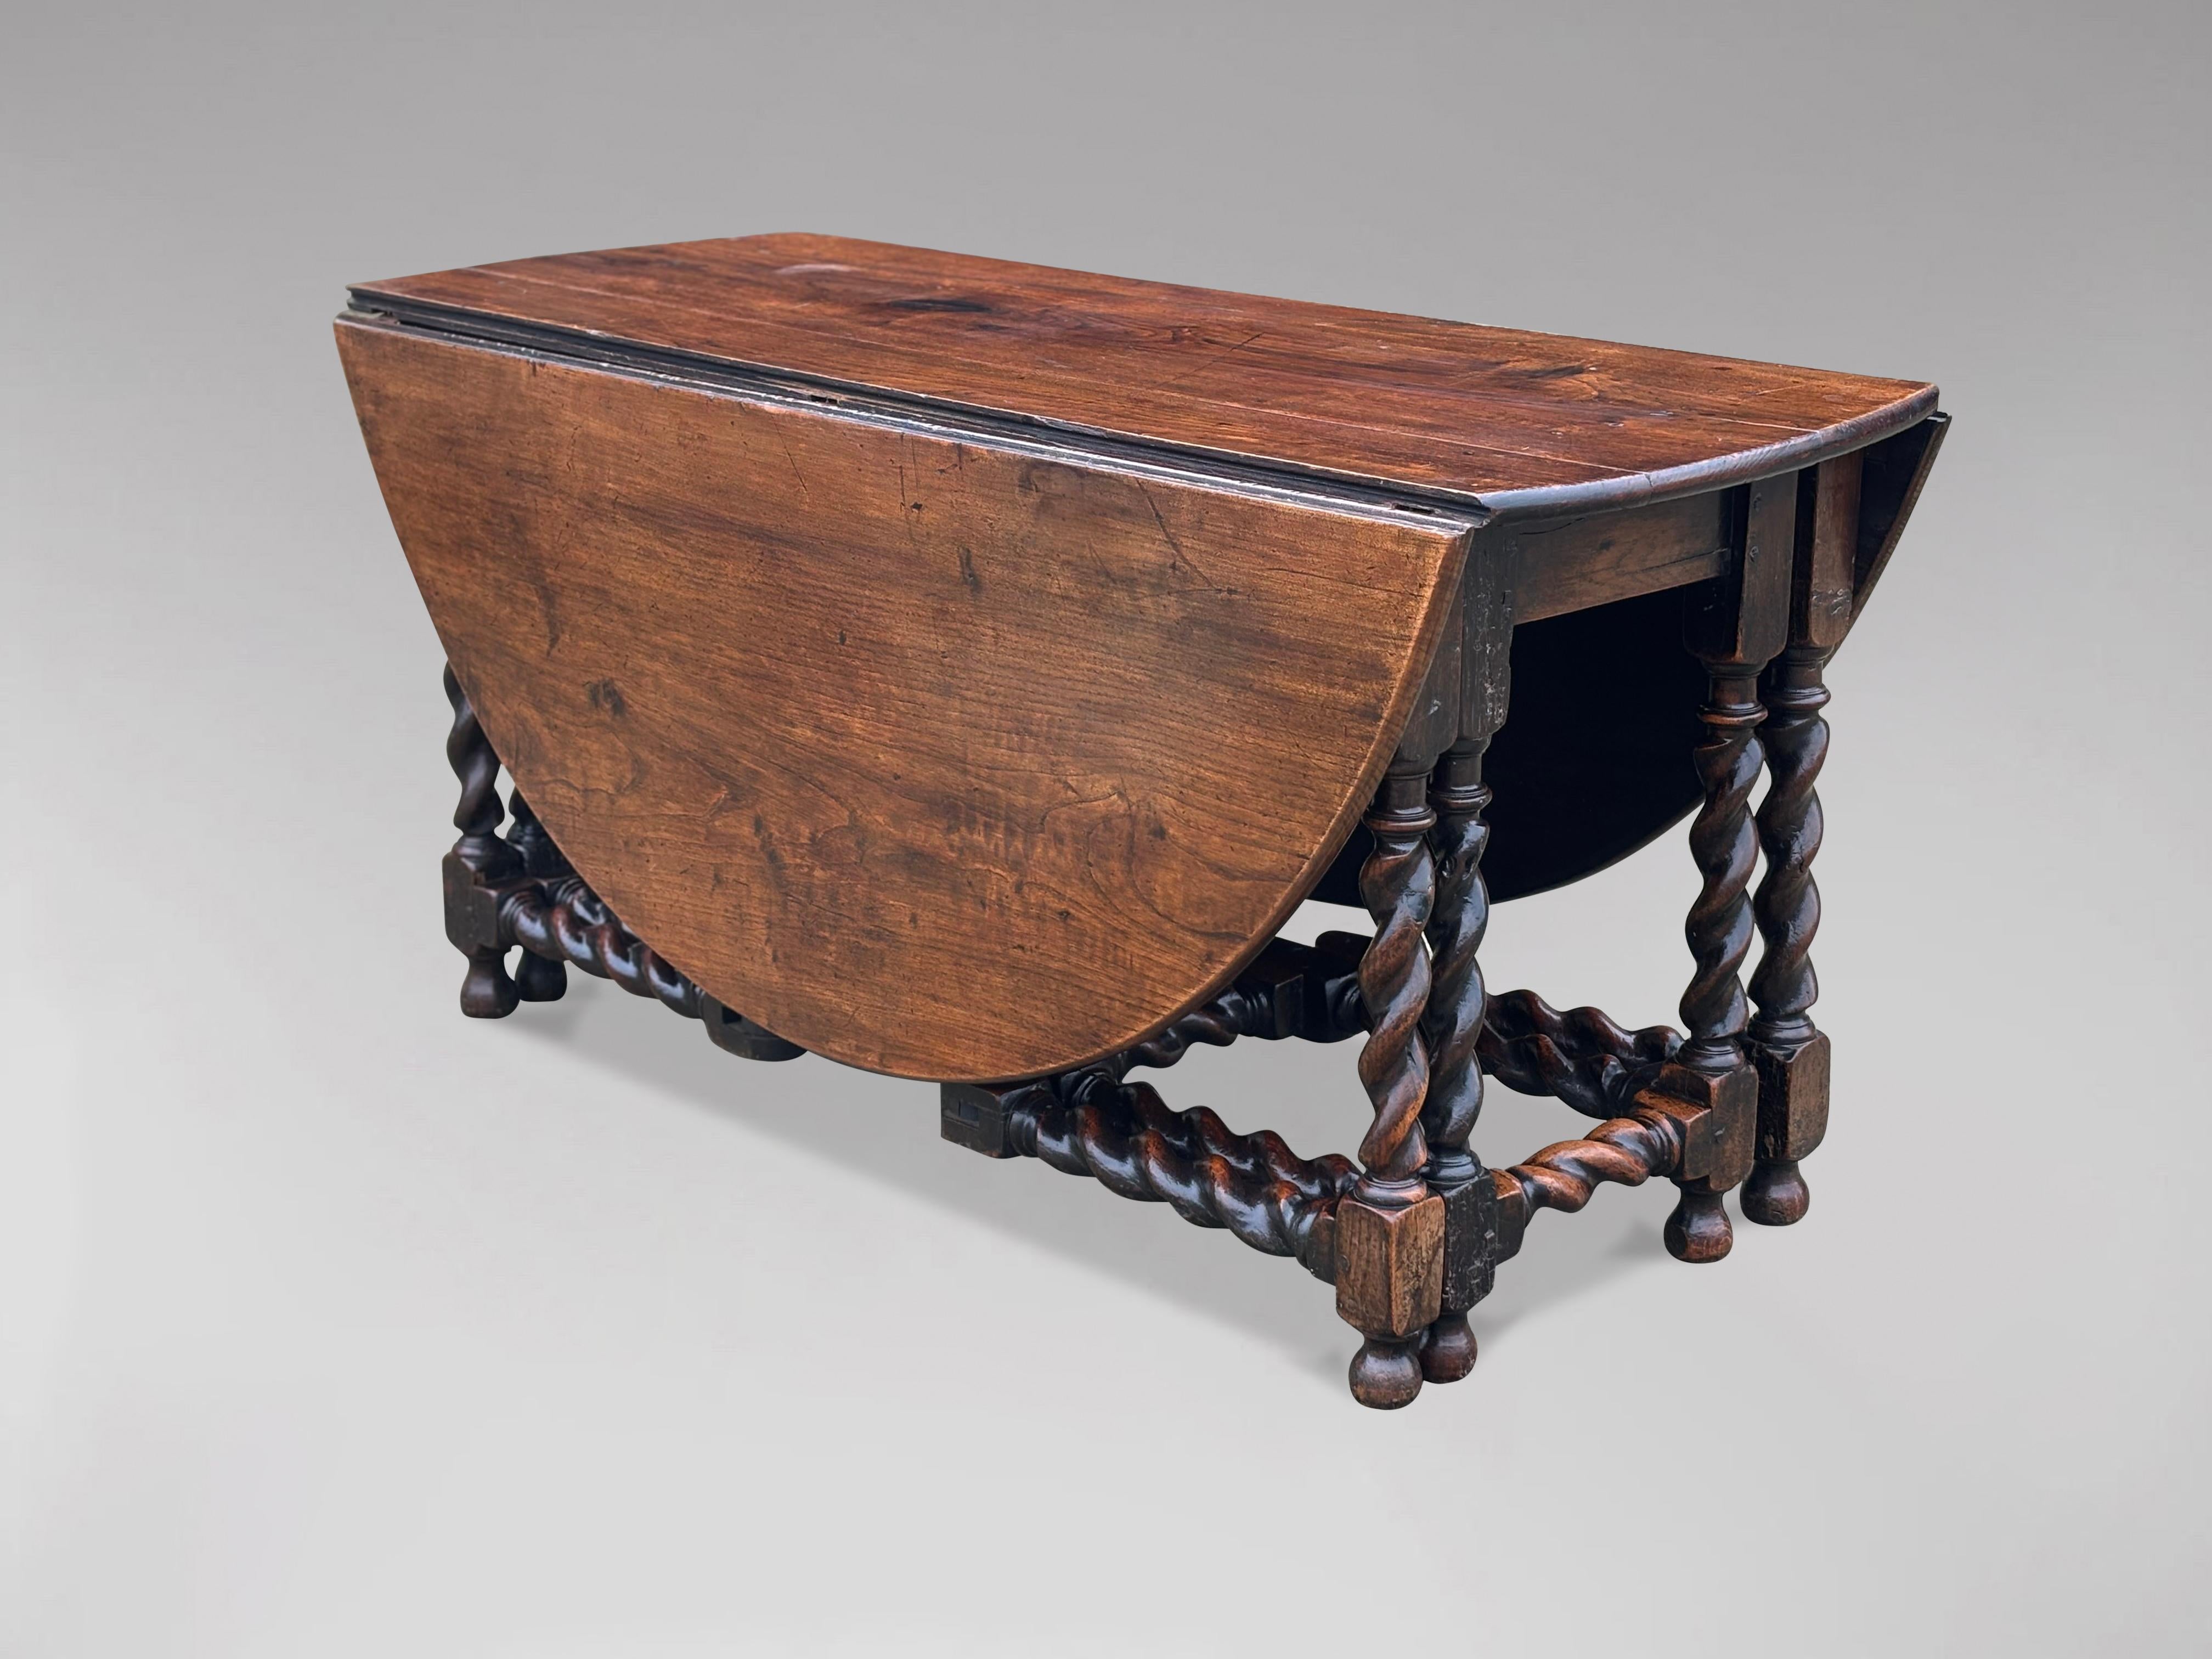 Large 17th Century Charles II Period Solid Oak Double Gateleg Table In Good Condition For Sale In Petworth,West Sussex, GB